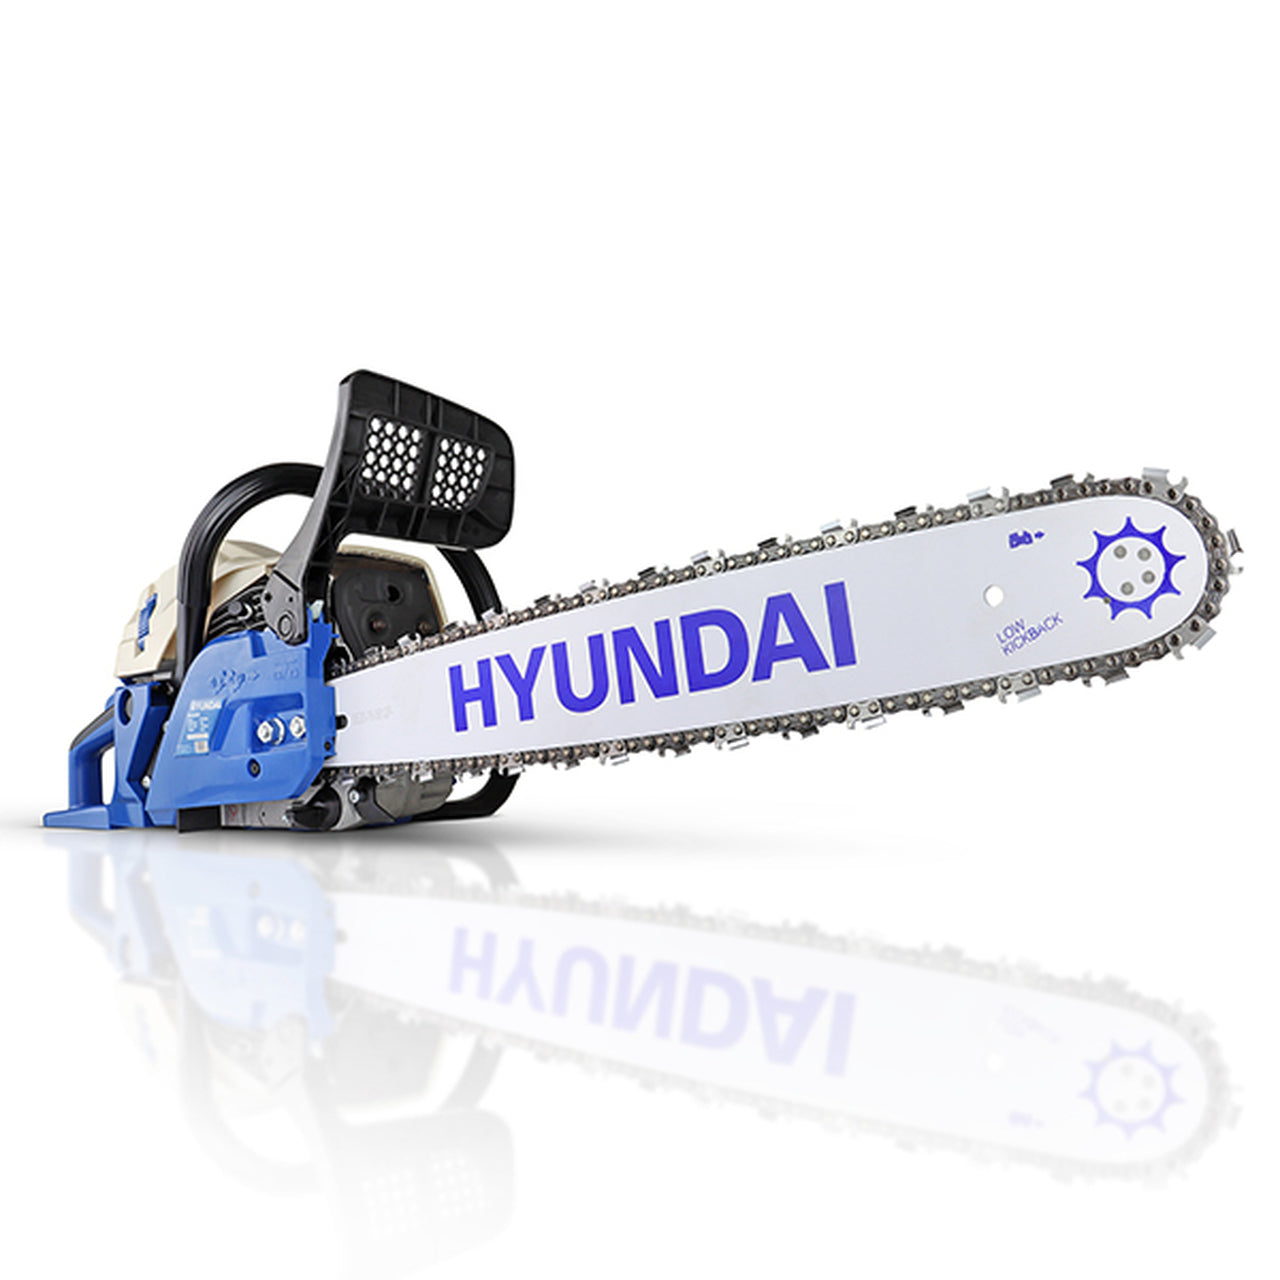 Leading Suppliers of Hyundai Chainsaws UK